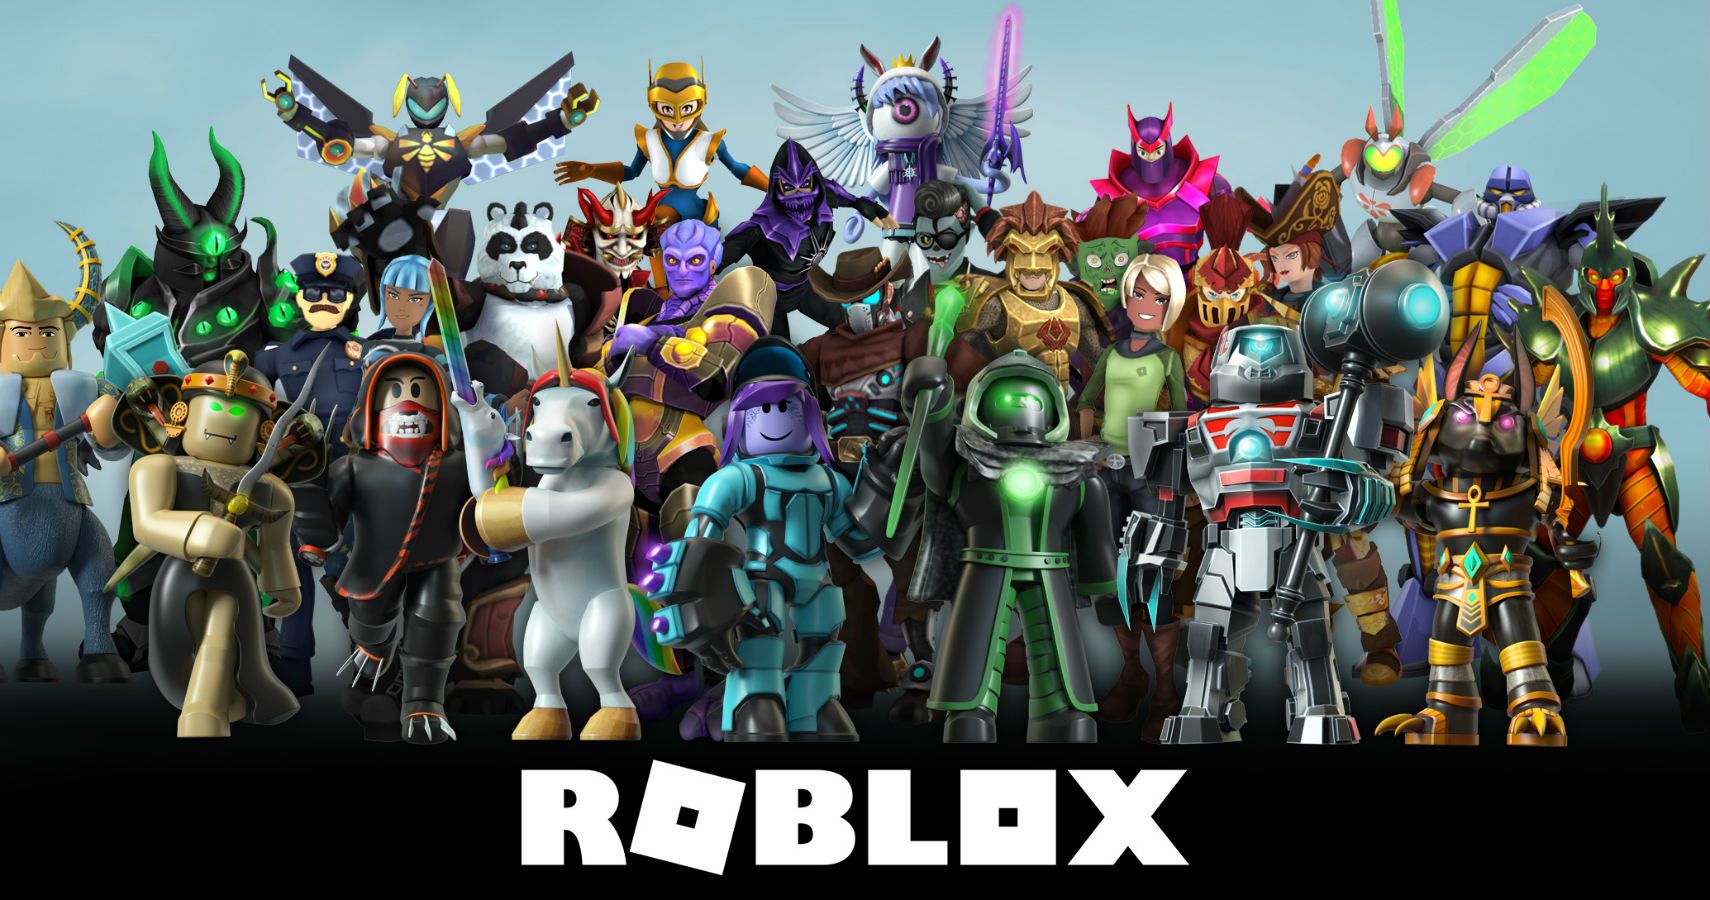 Roblox Now Has More Active Players Than Minecraft - roblox galaxy tower